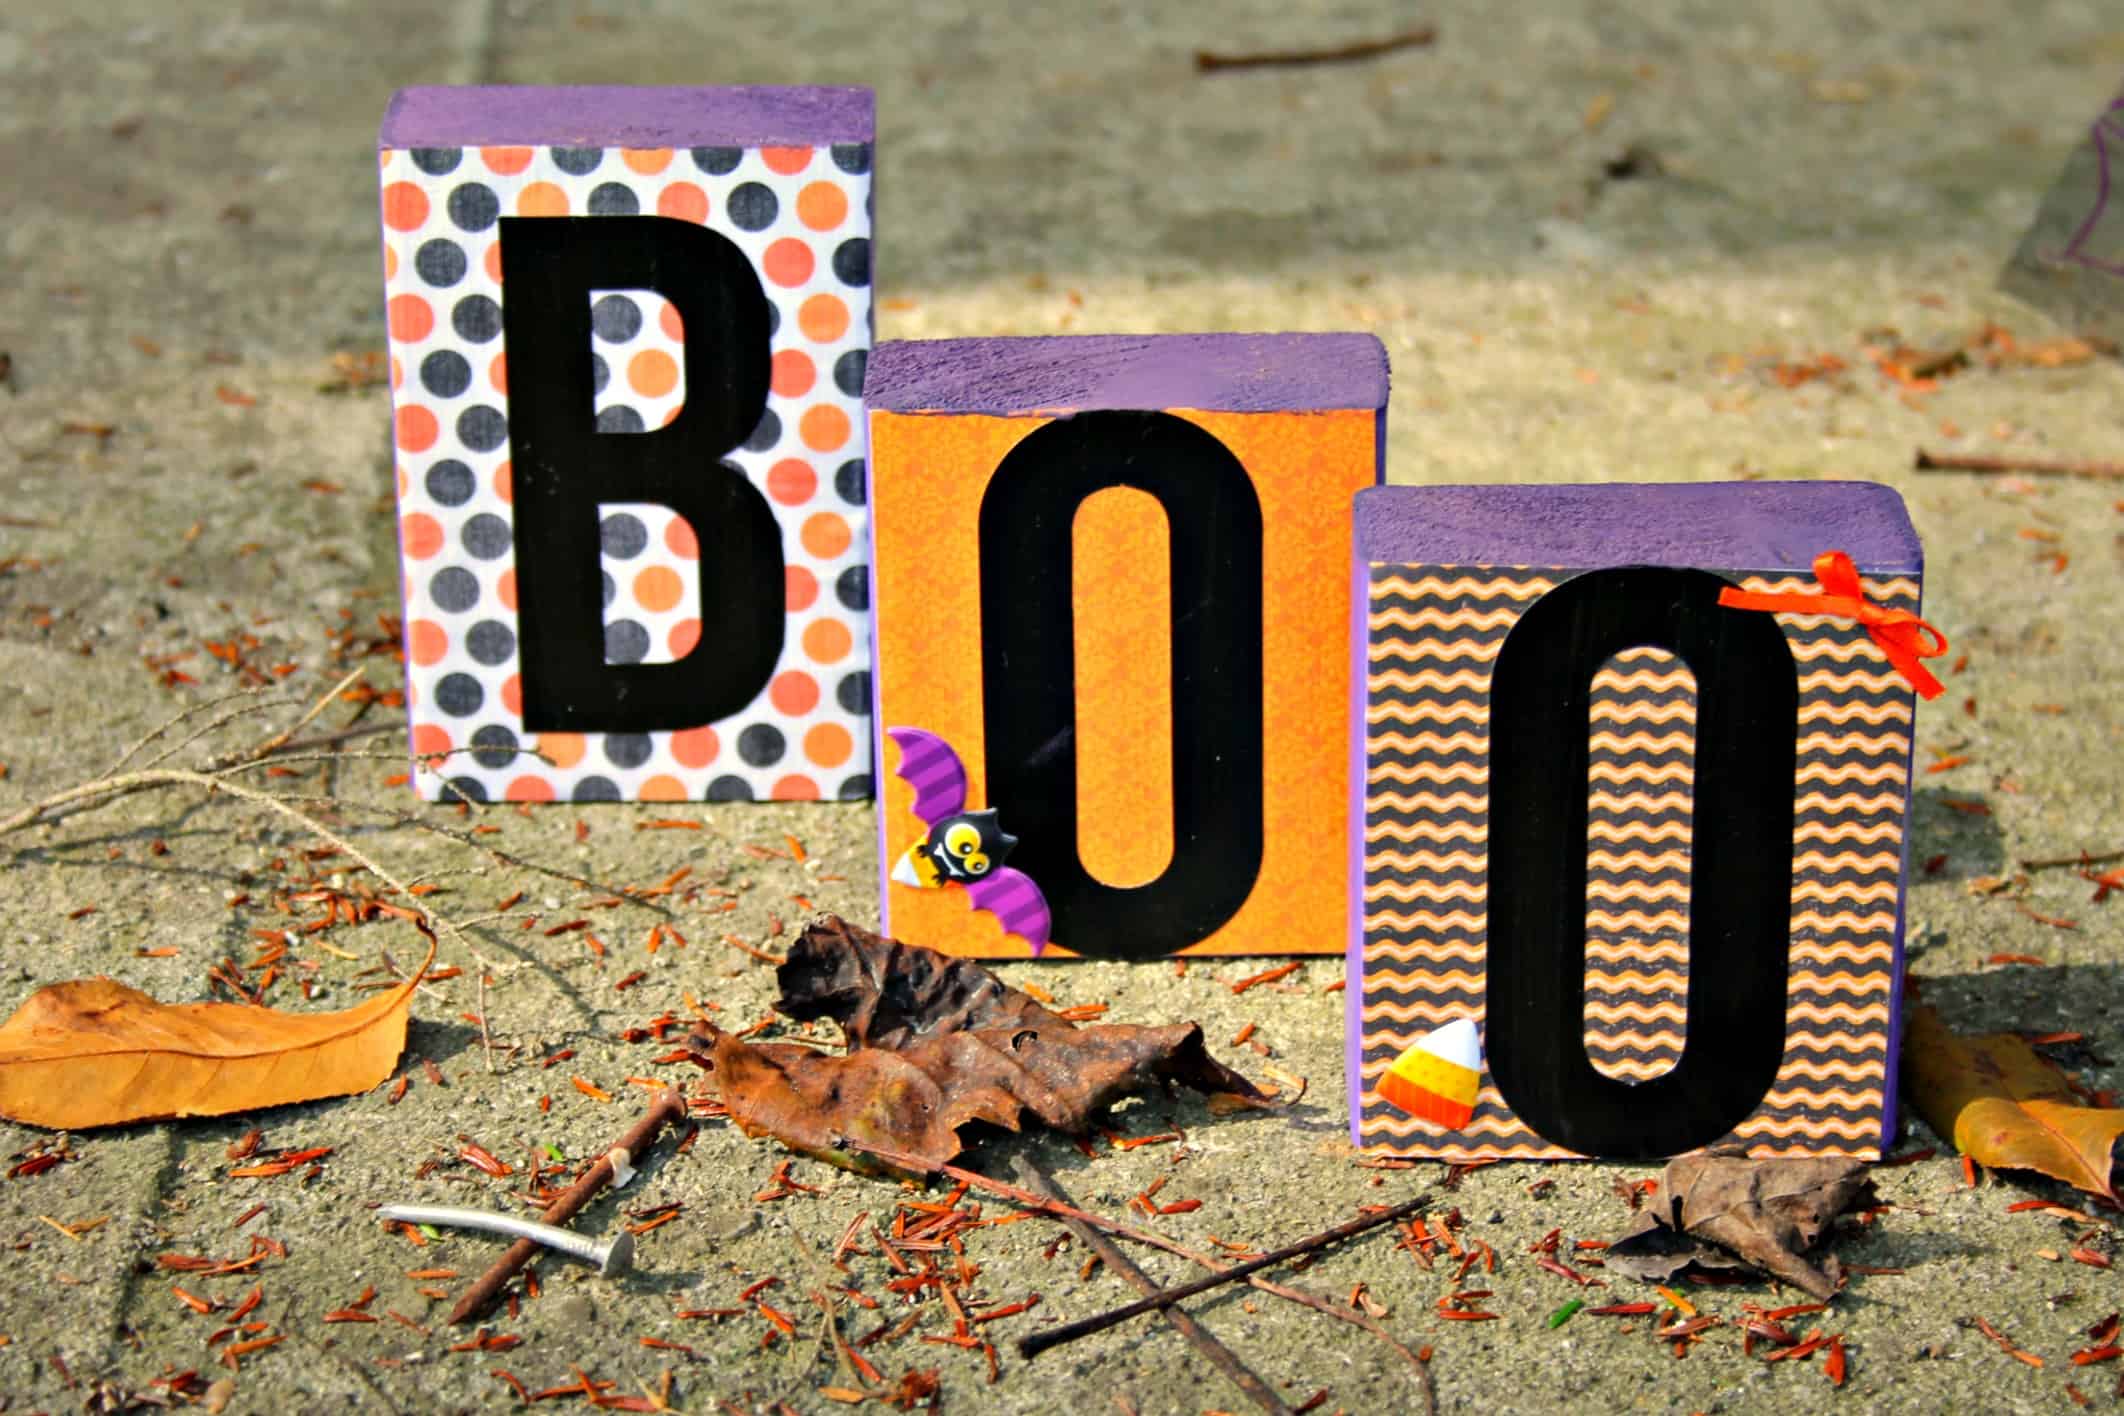 Need some indoor Halloween decorating ideas? Make this Halloween Boo Block DIY! You'll have decor that can be used year after year with this simple and fun project.